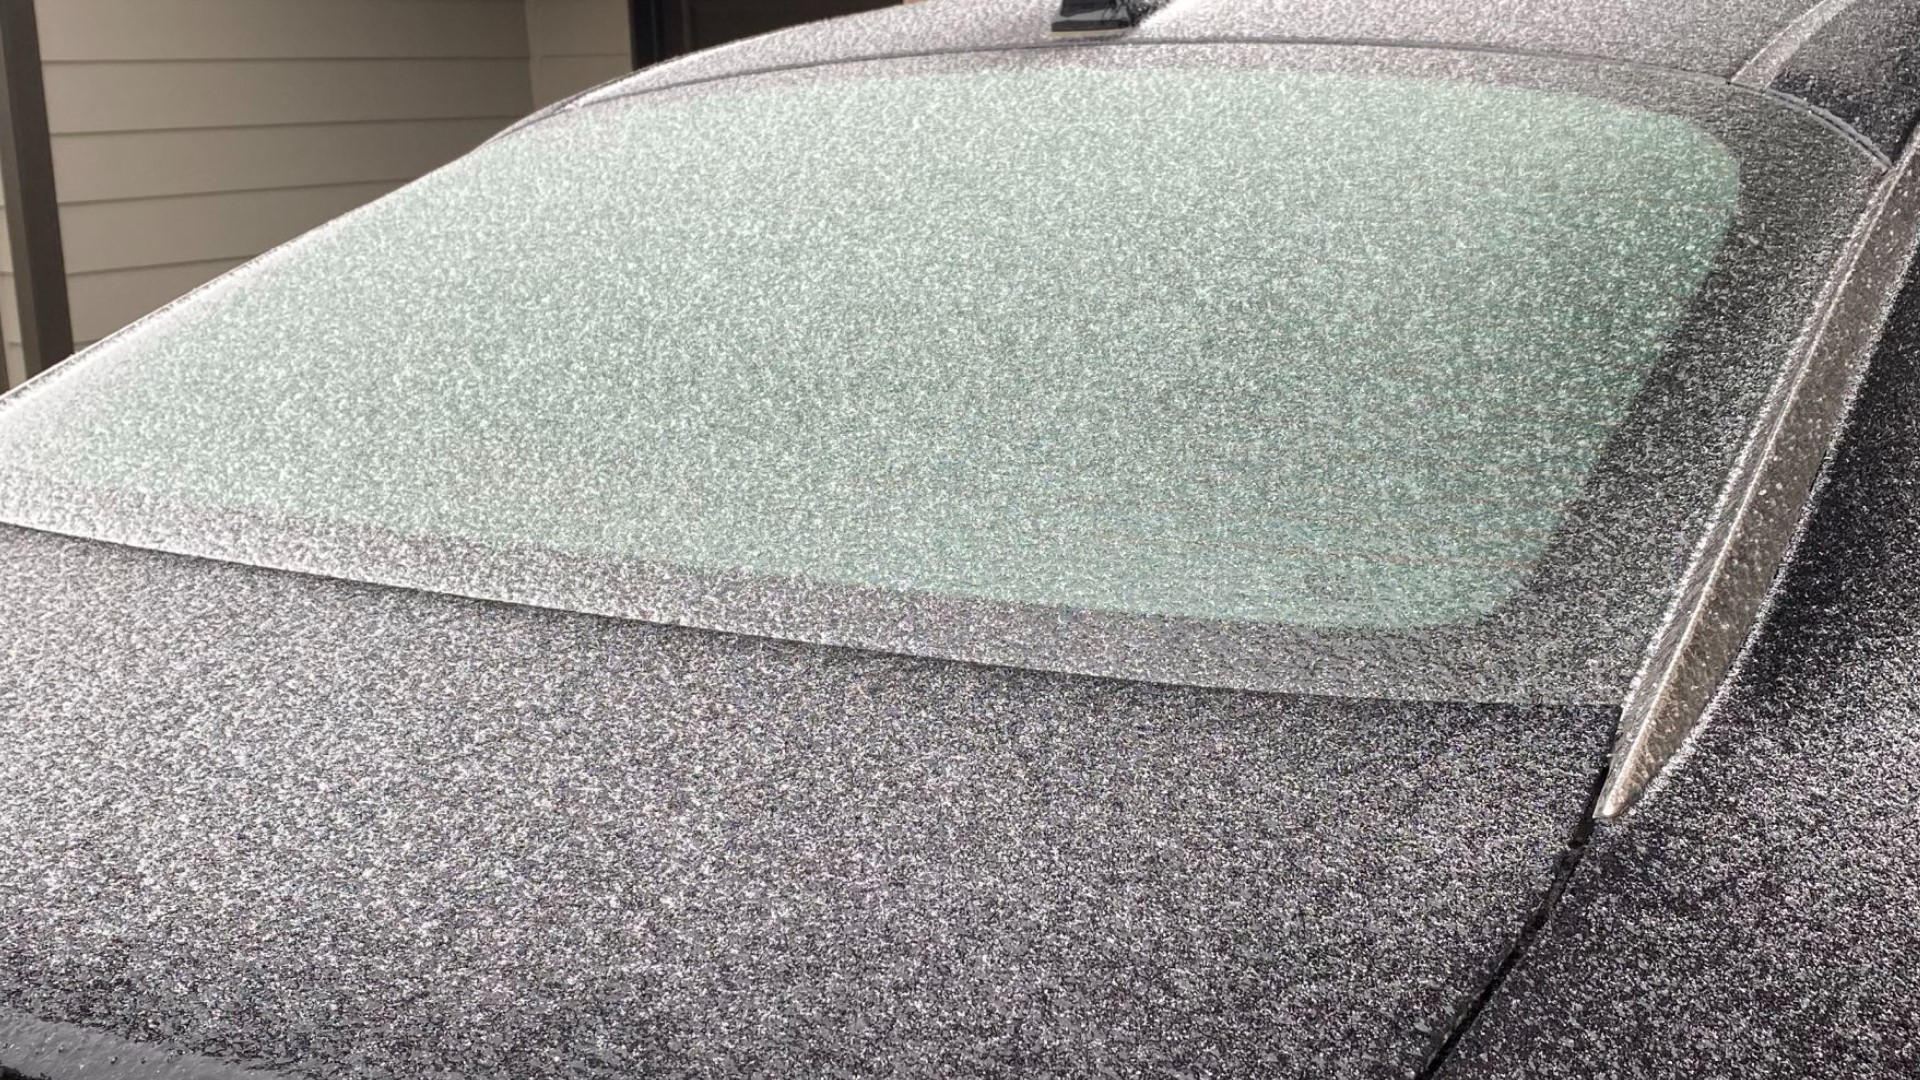 AAA has tips to help you when facing freezing temperatures and frosty windshields.